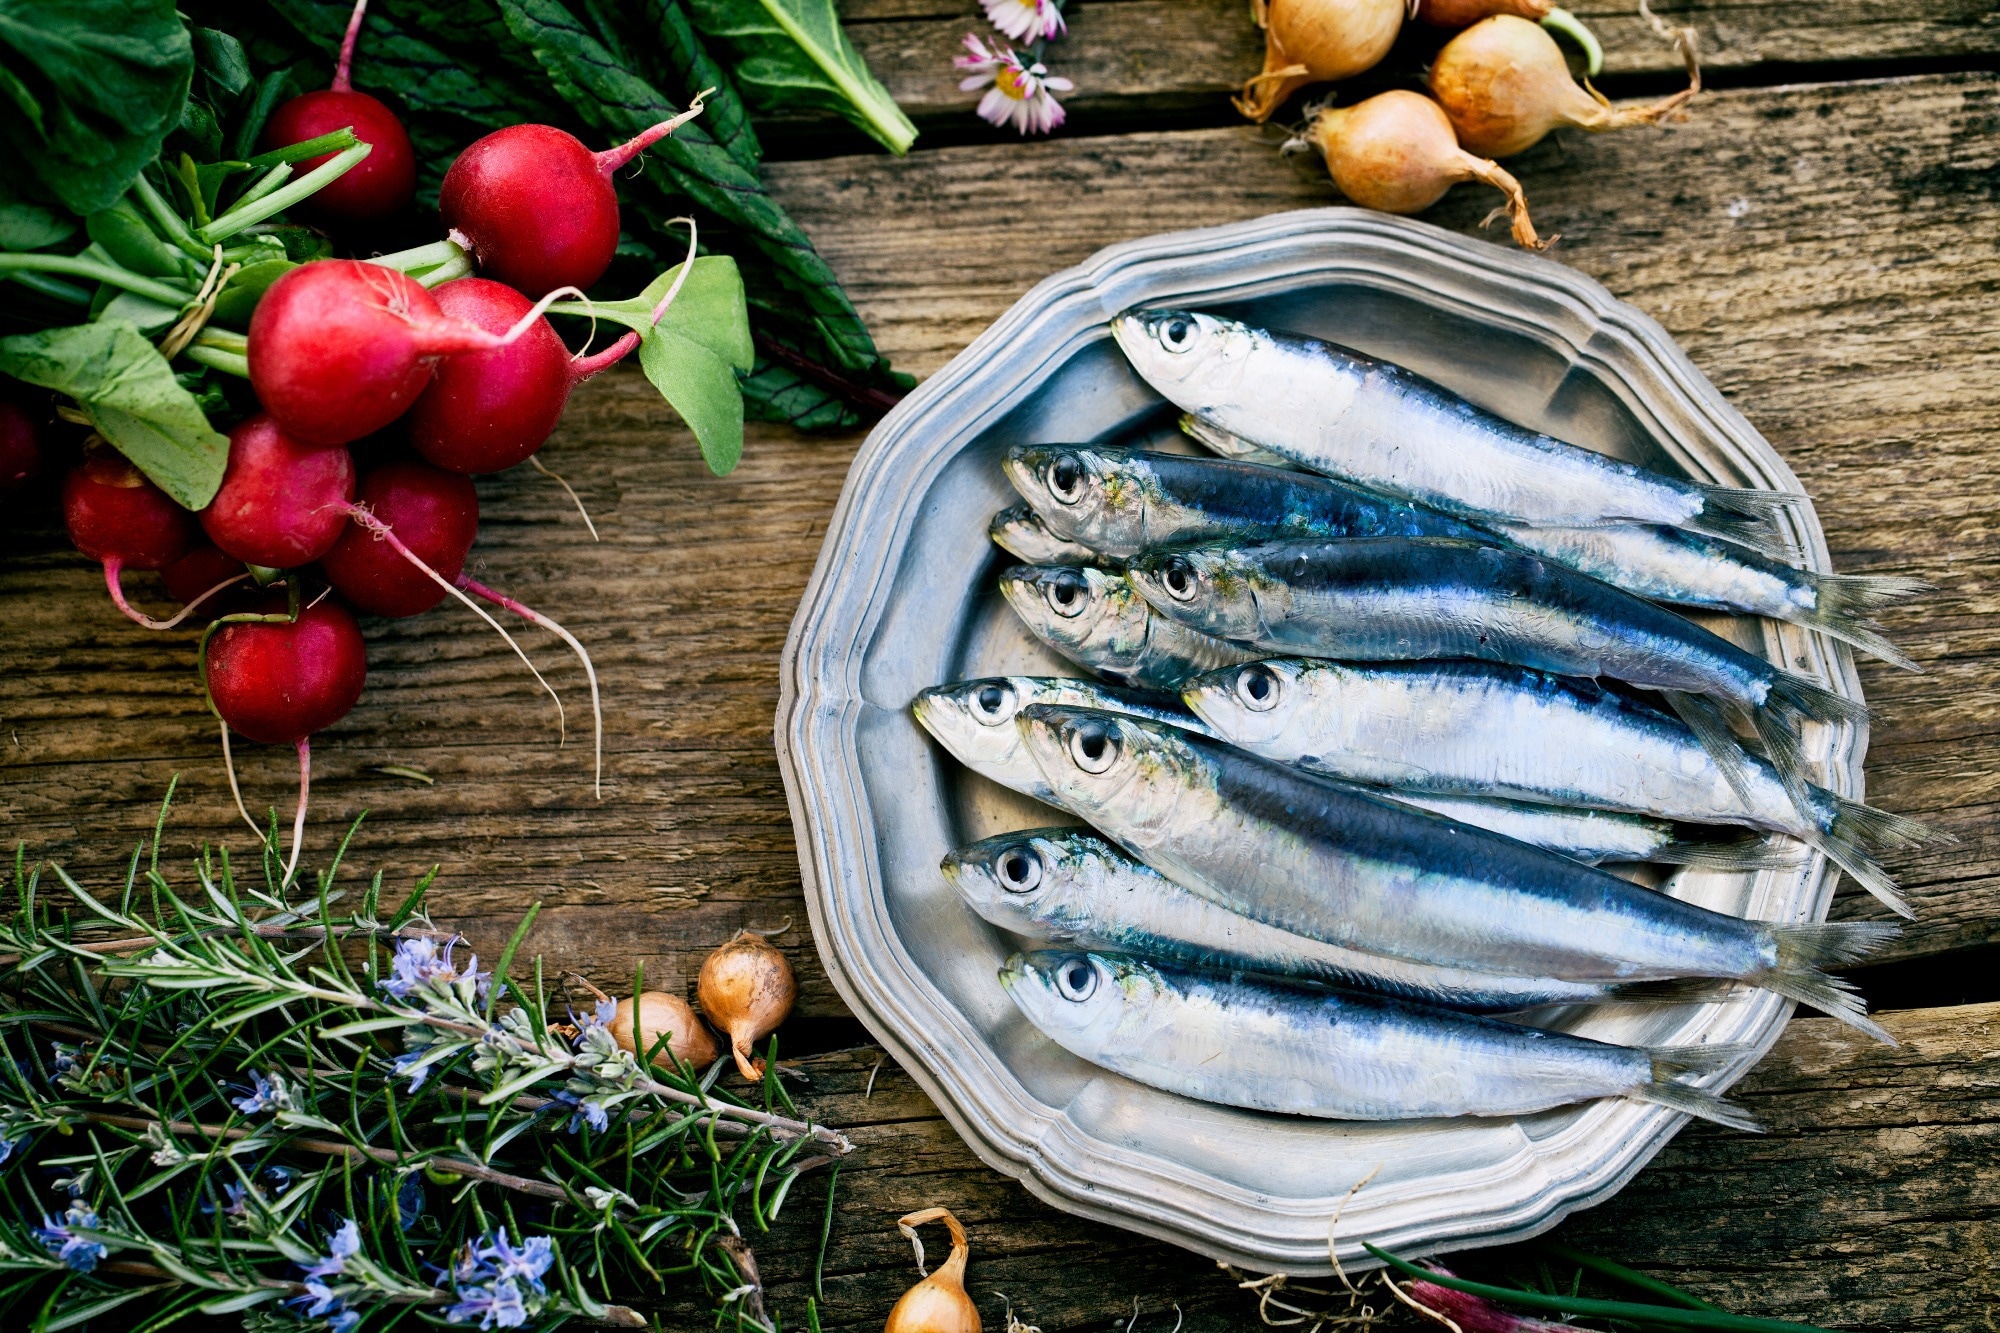 Study: Eating more sardines instead of fish oil supplementation: Beyond omega-3 polyunsaturated fatty acids, a matrix of nutrients with cardiovascular benefits. Image Credit: mythja/Shutterstock.com